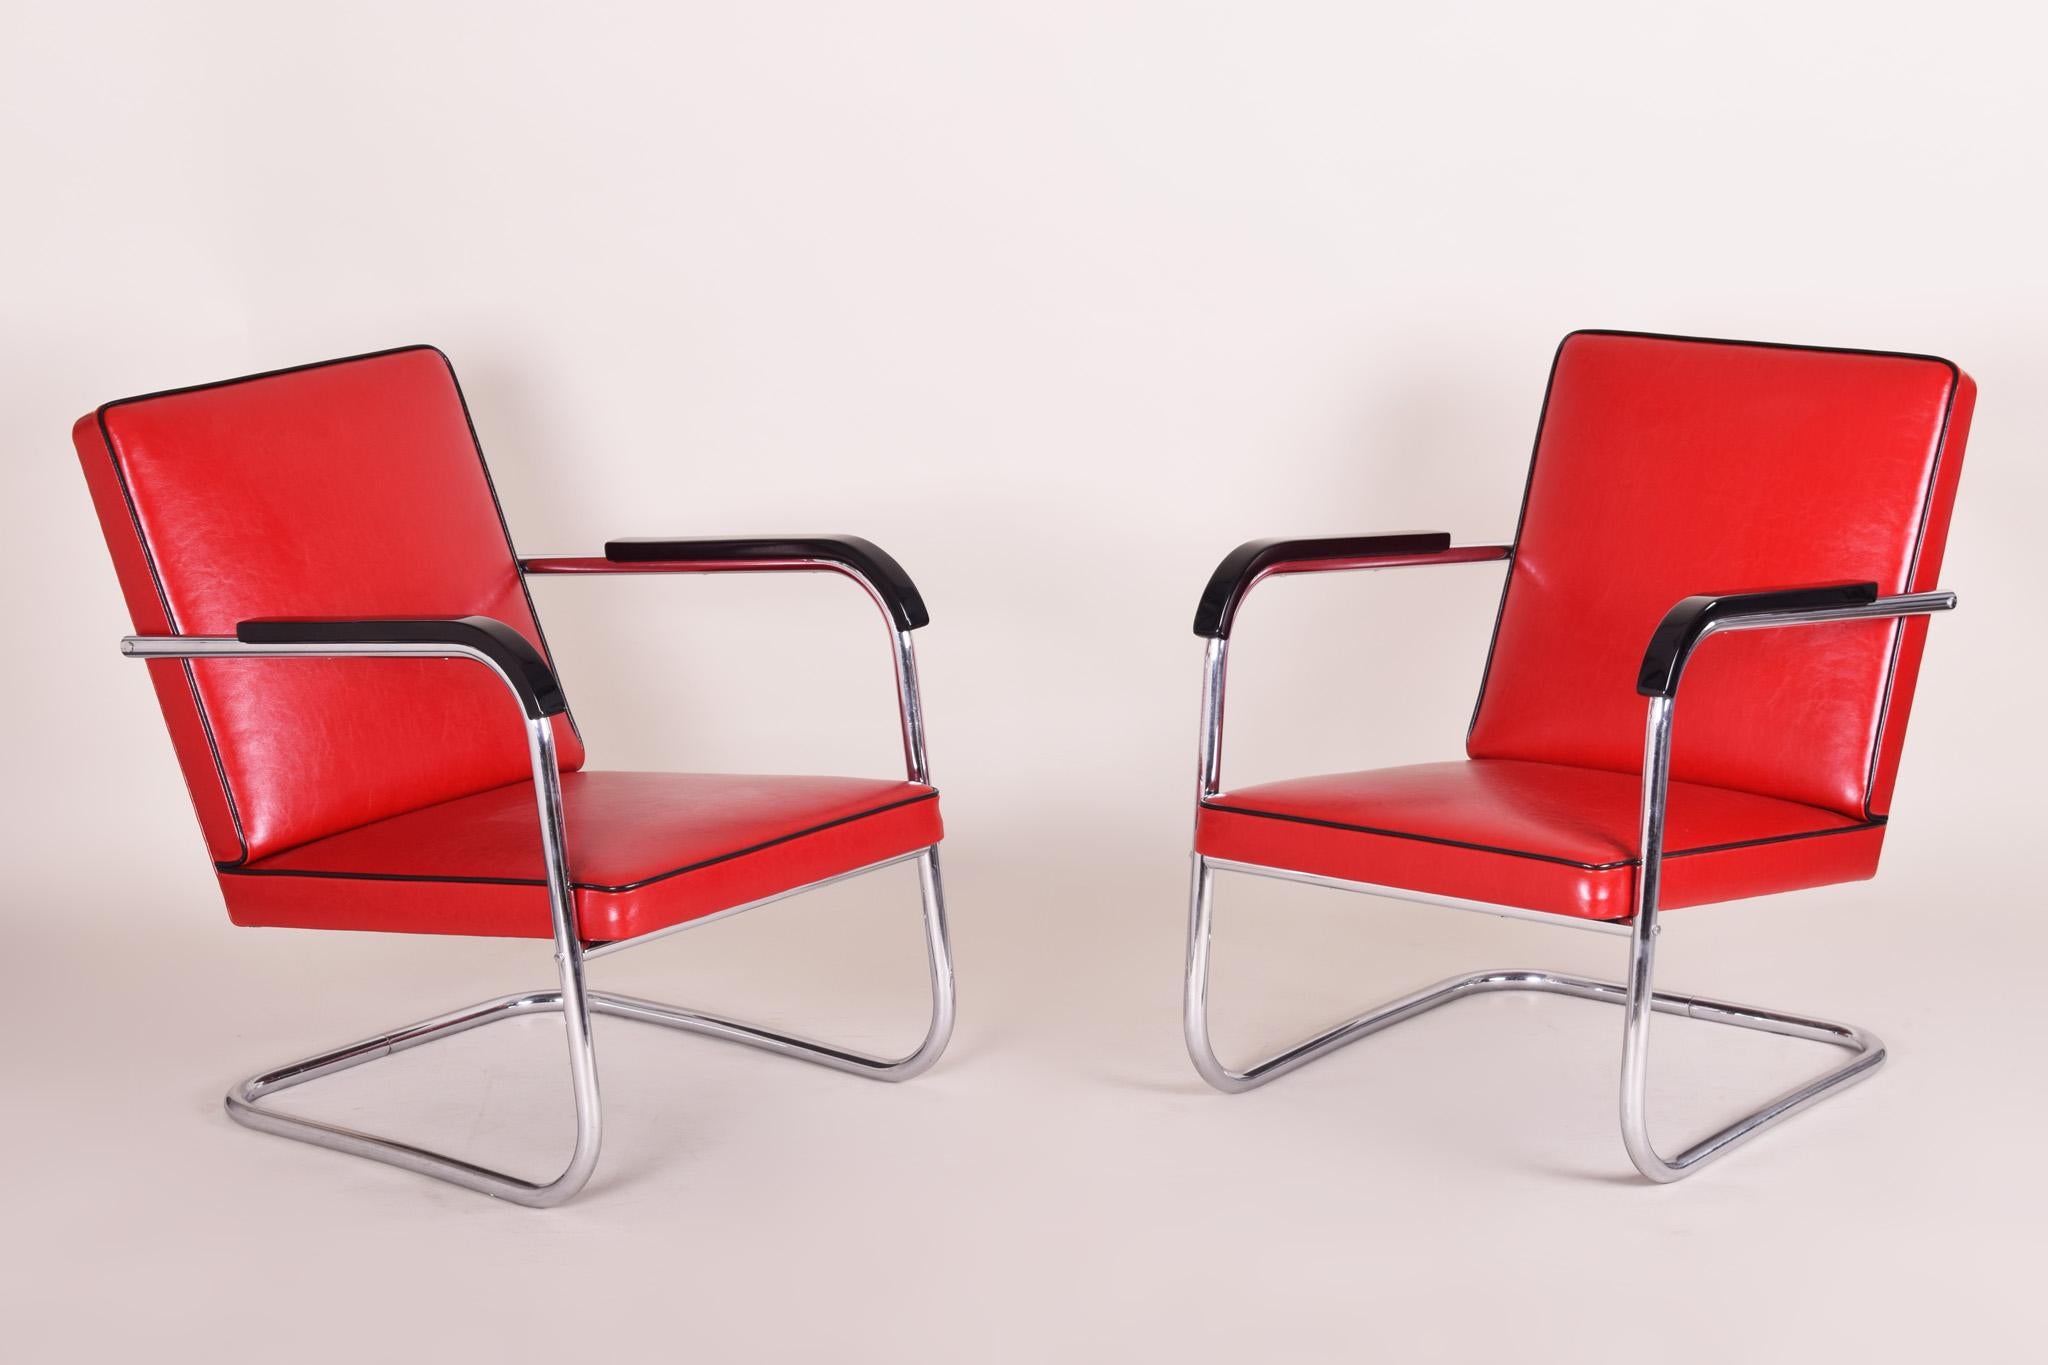 Pair of red Bauhaus armchairs made out of high quality leather and Chrome plated steel.
Made in´30s Germany by Thonet and Designed by Anton Lorenz.
Fully restored by our team.